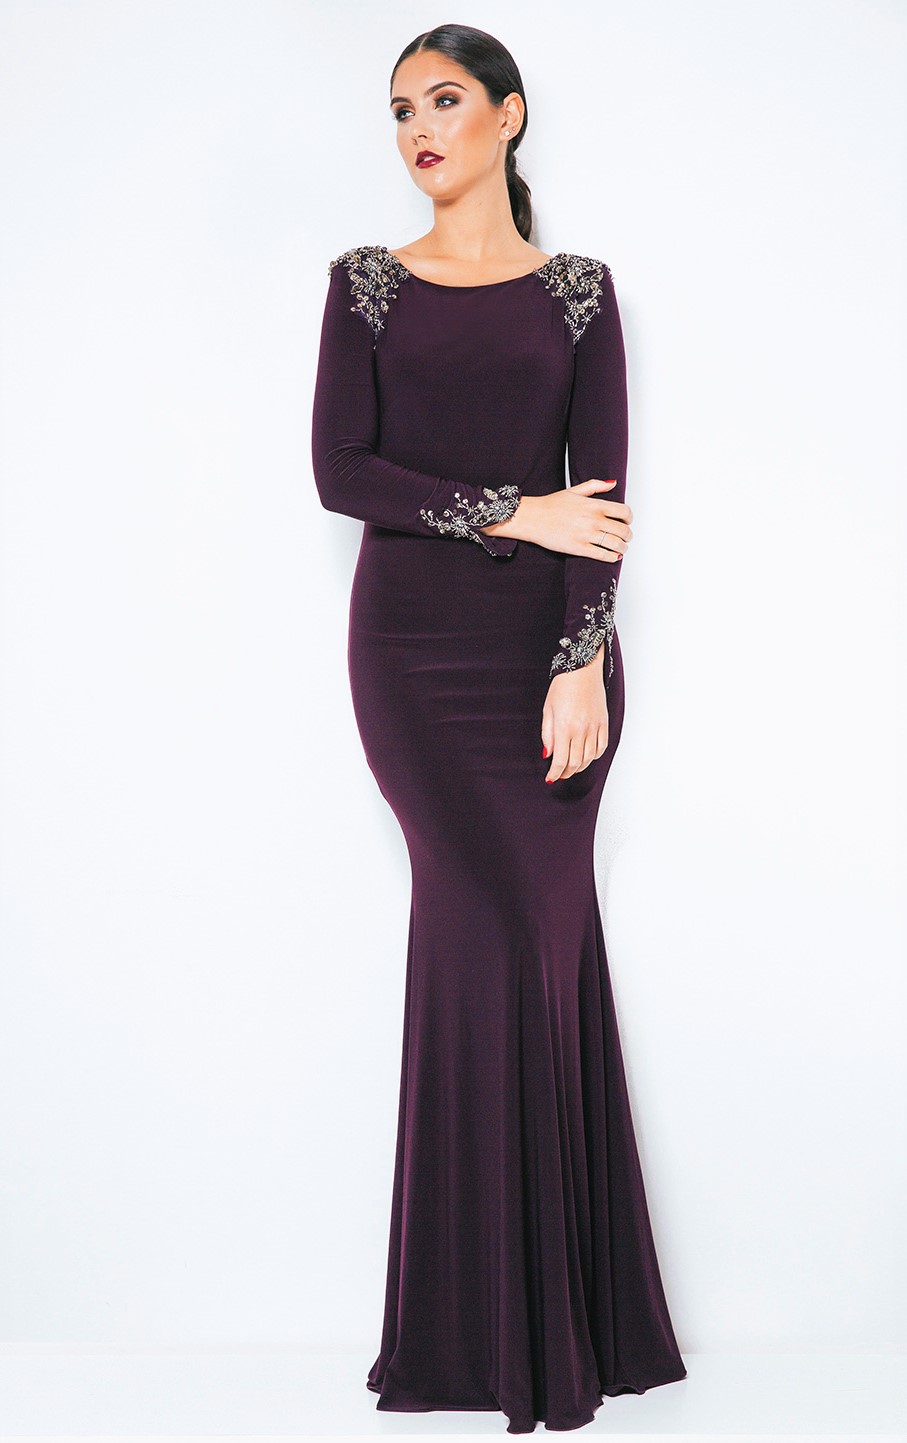 Sophisticated, sleeved evening gown with embellished shoulders & cuffs ...